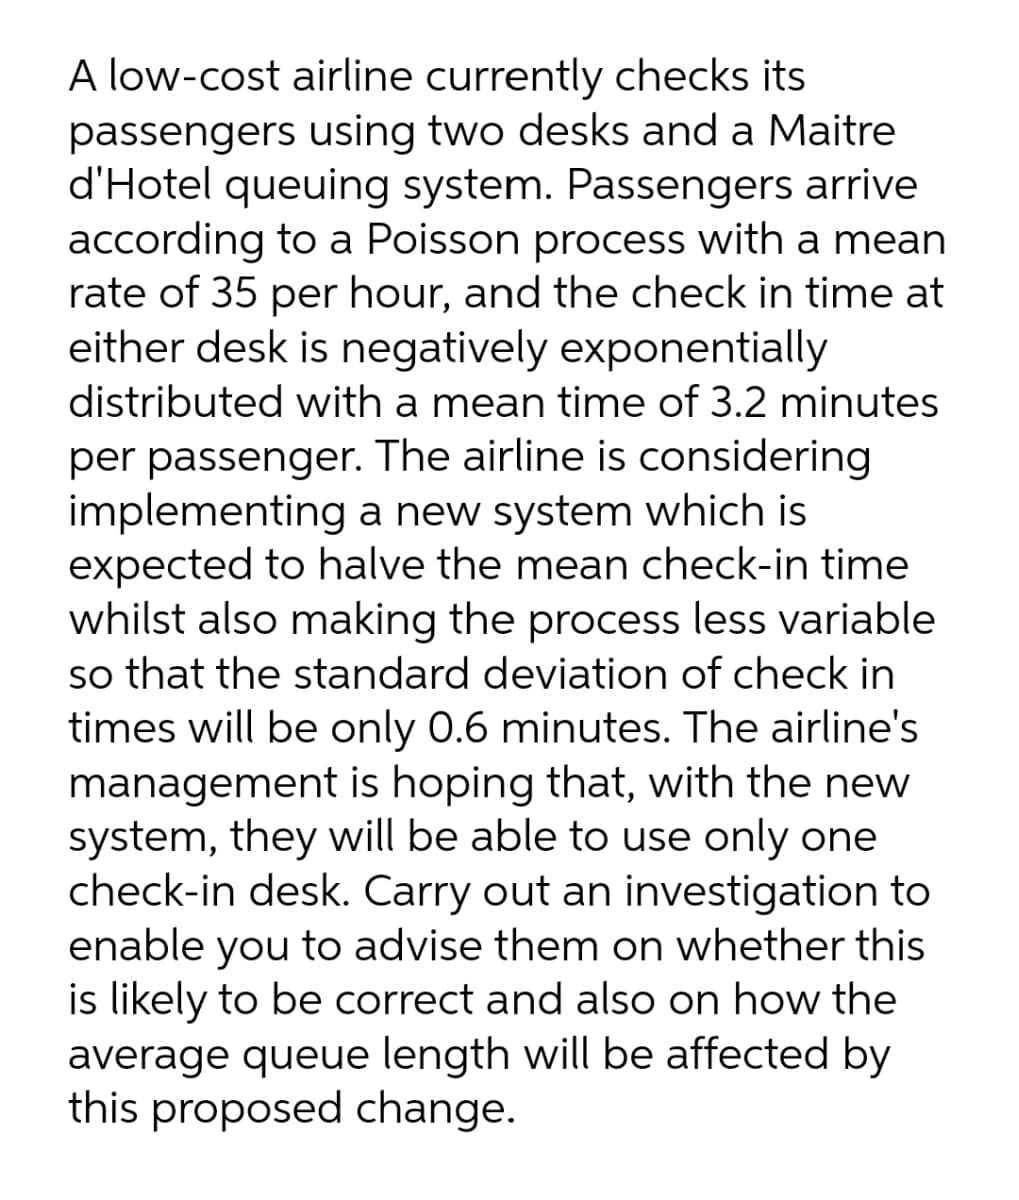 A low-cost airline currently checks its
passengers using two desks and a Maitre
d'Hotel queuing system. Passengers arrive
according to a Poisson process with a mean
rate of 35 per hour, and the check in time at
either desk is negatively exponentially
distributed with a mean time of 3.2 minutes
per passenger. The airline is considering
implementing a new system which is
expected to halve the mean check-in time
whilst also making the process less variable
so that the standard deviation of check in
times will be only 0.6 minutes. The airline's
management is hoping that, with the new
system, they will be able to use only one
check-in desk. Carry out an investigation to
enable you to advise them on whether this
is likely to be correct and also on how the
average queue length will be affected by
this proposed change.
